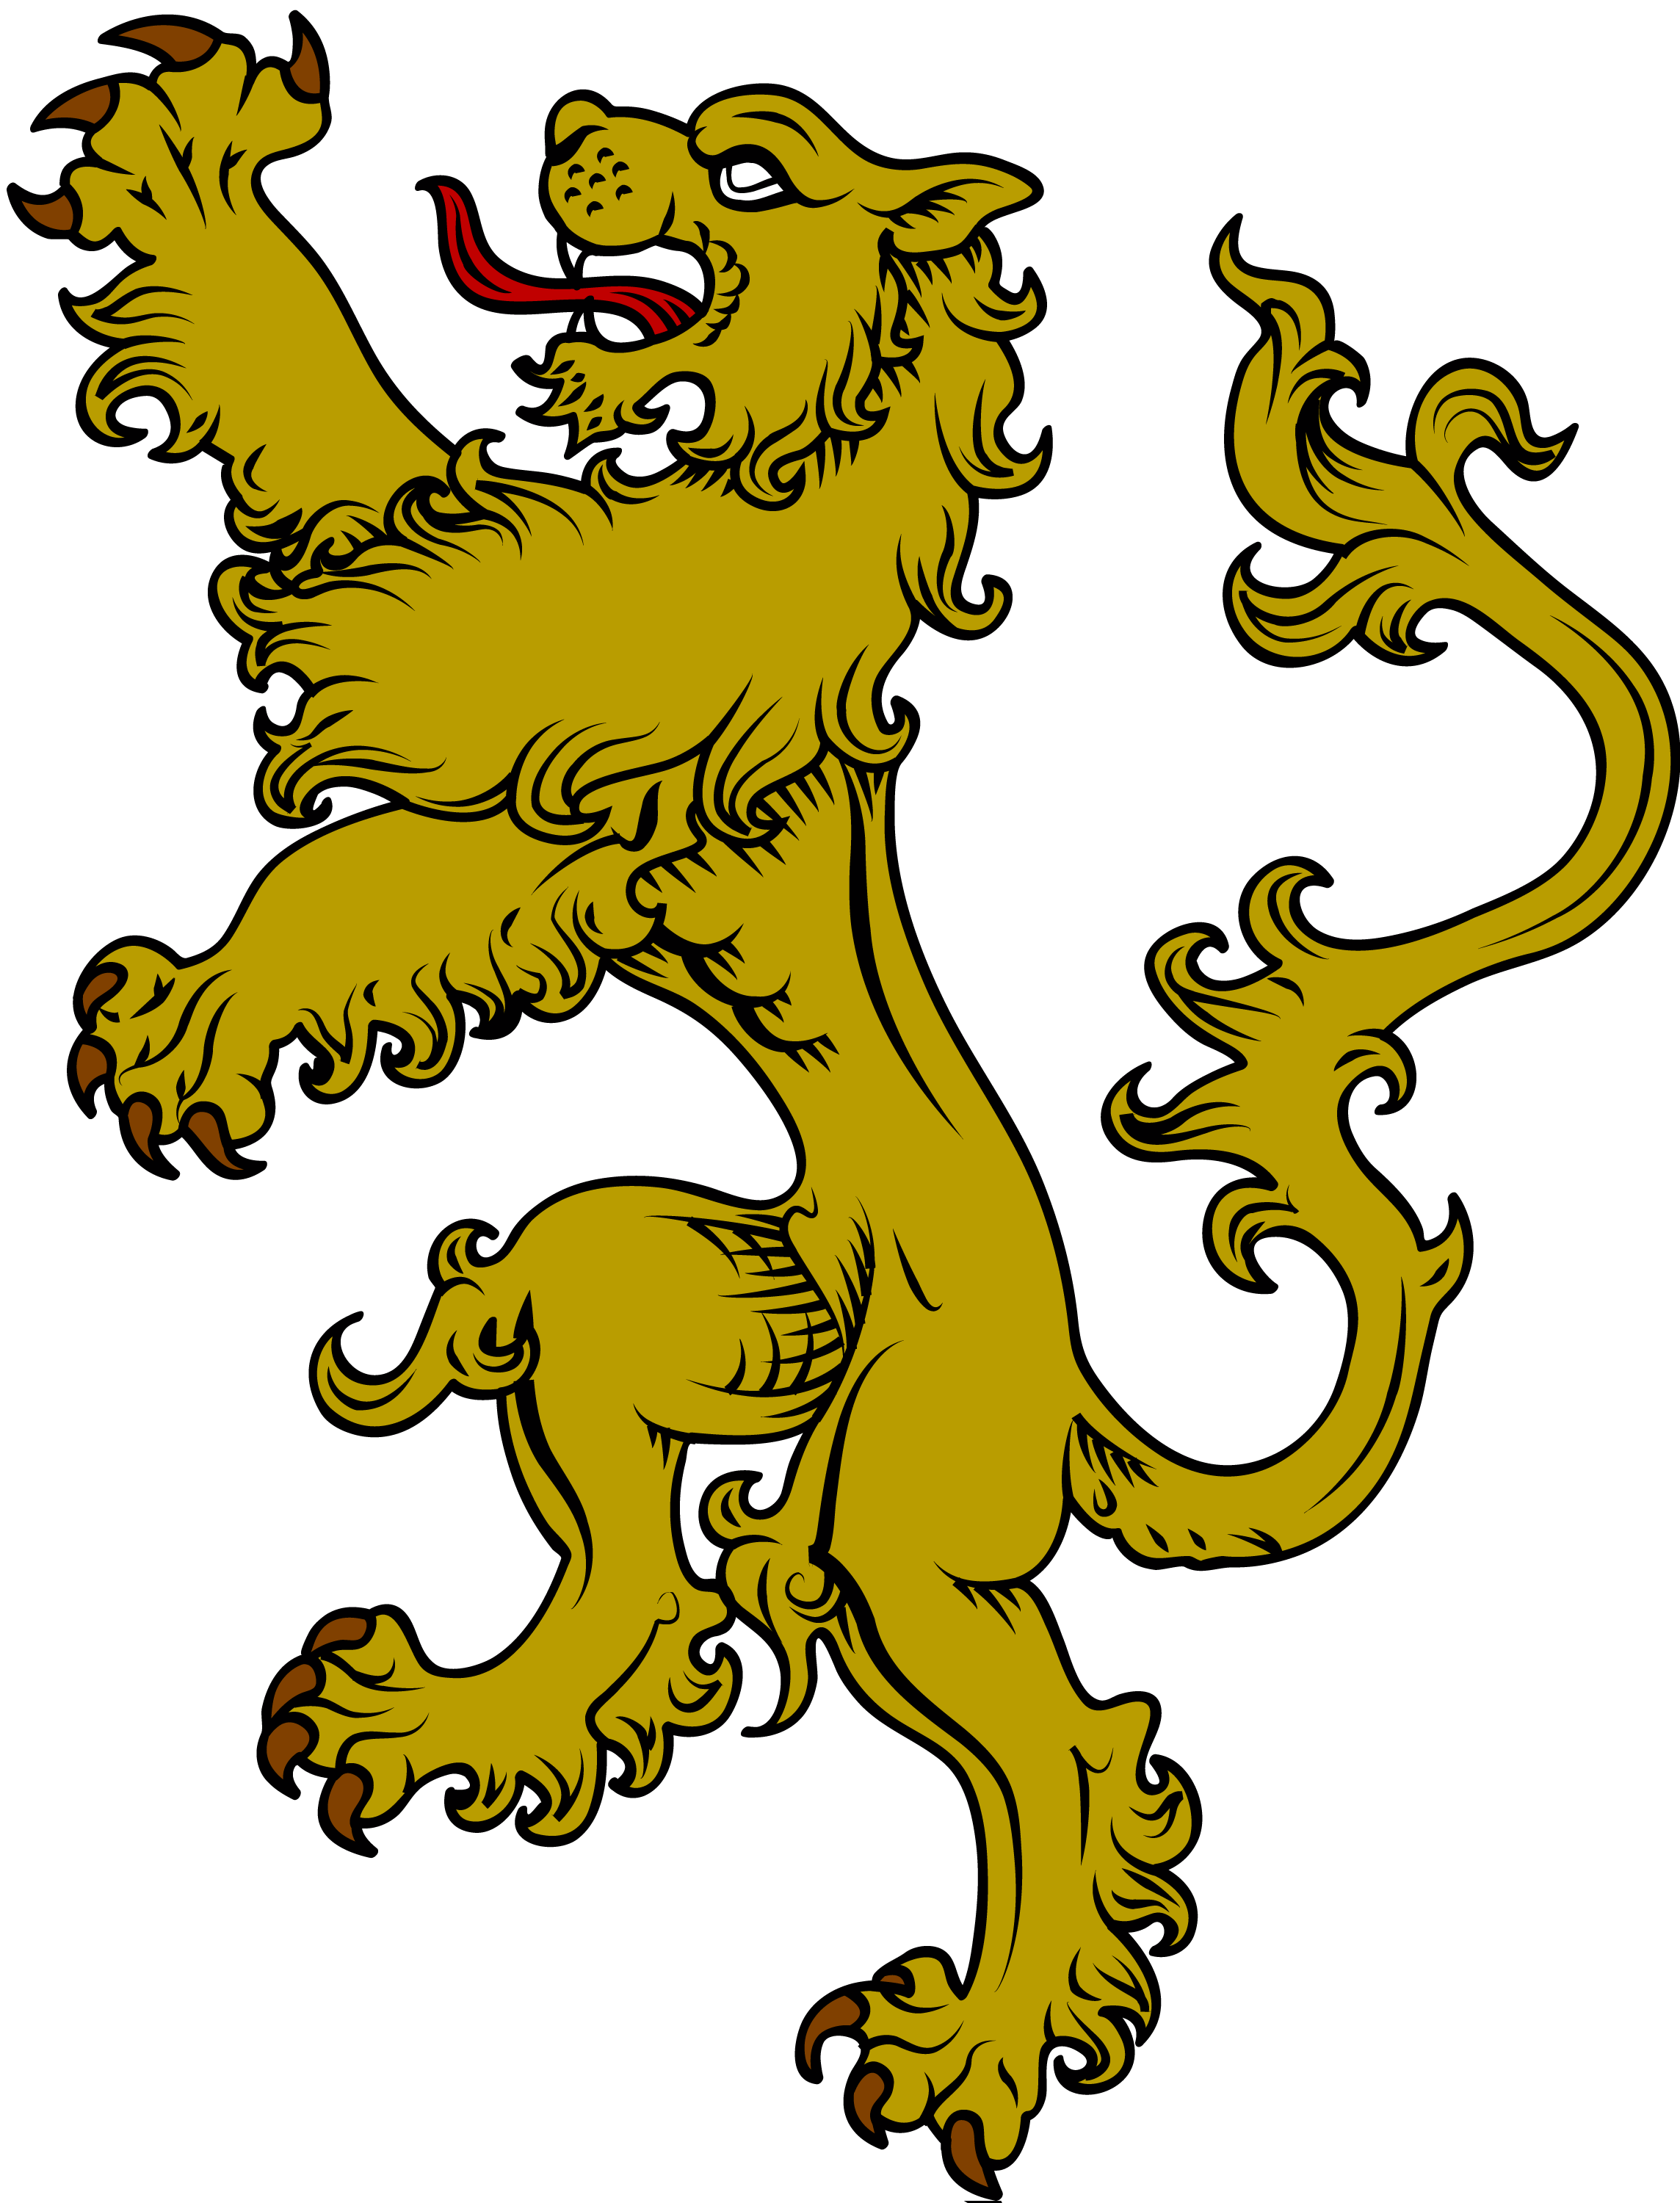 Lion clipart courageous. The symbol of a